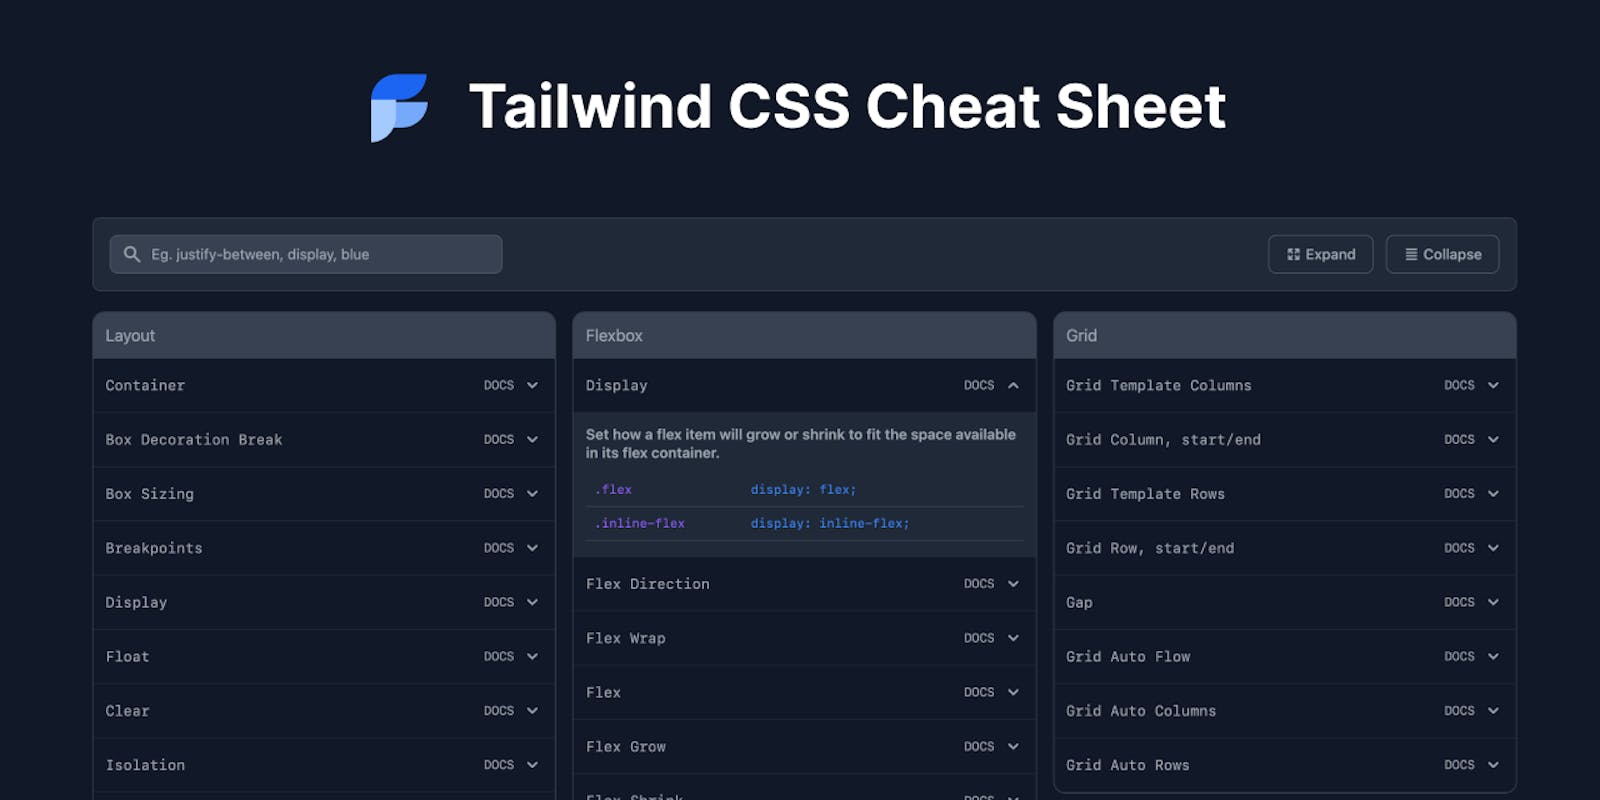 Use this Tailwind CSS Cheat Sheet to speed up your development process